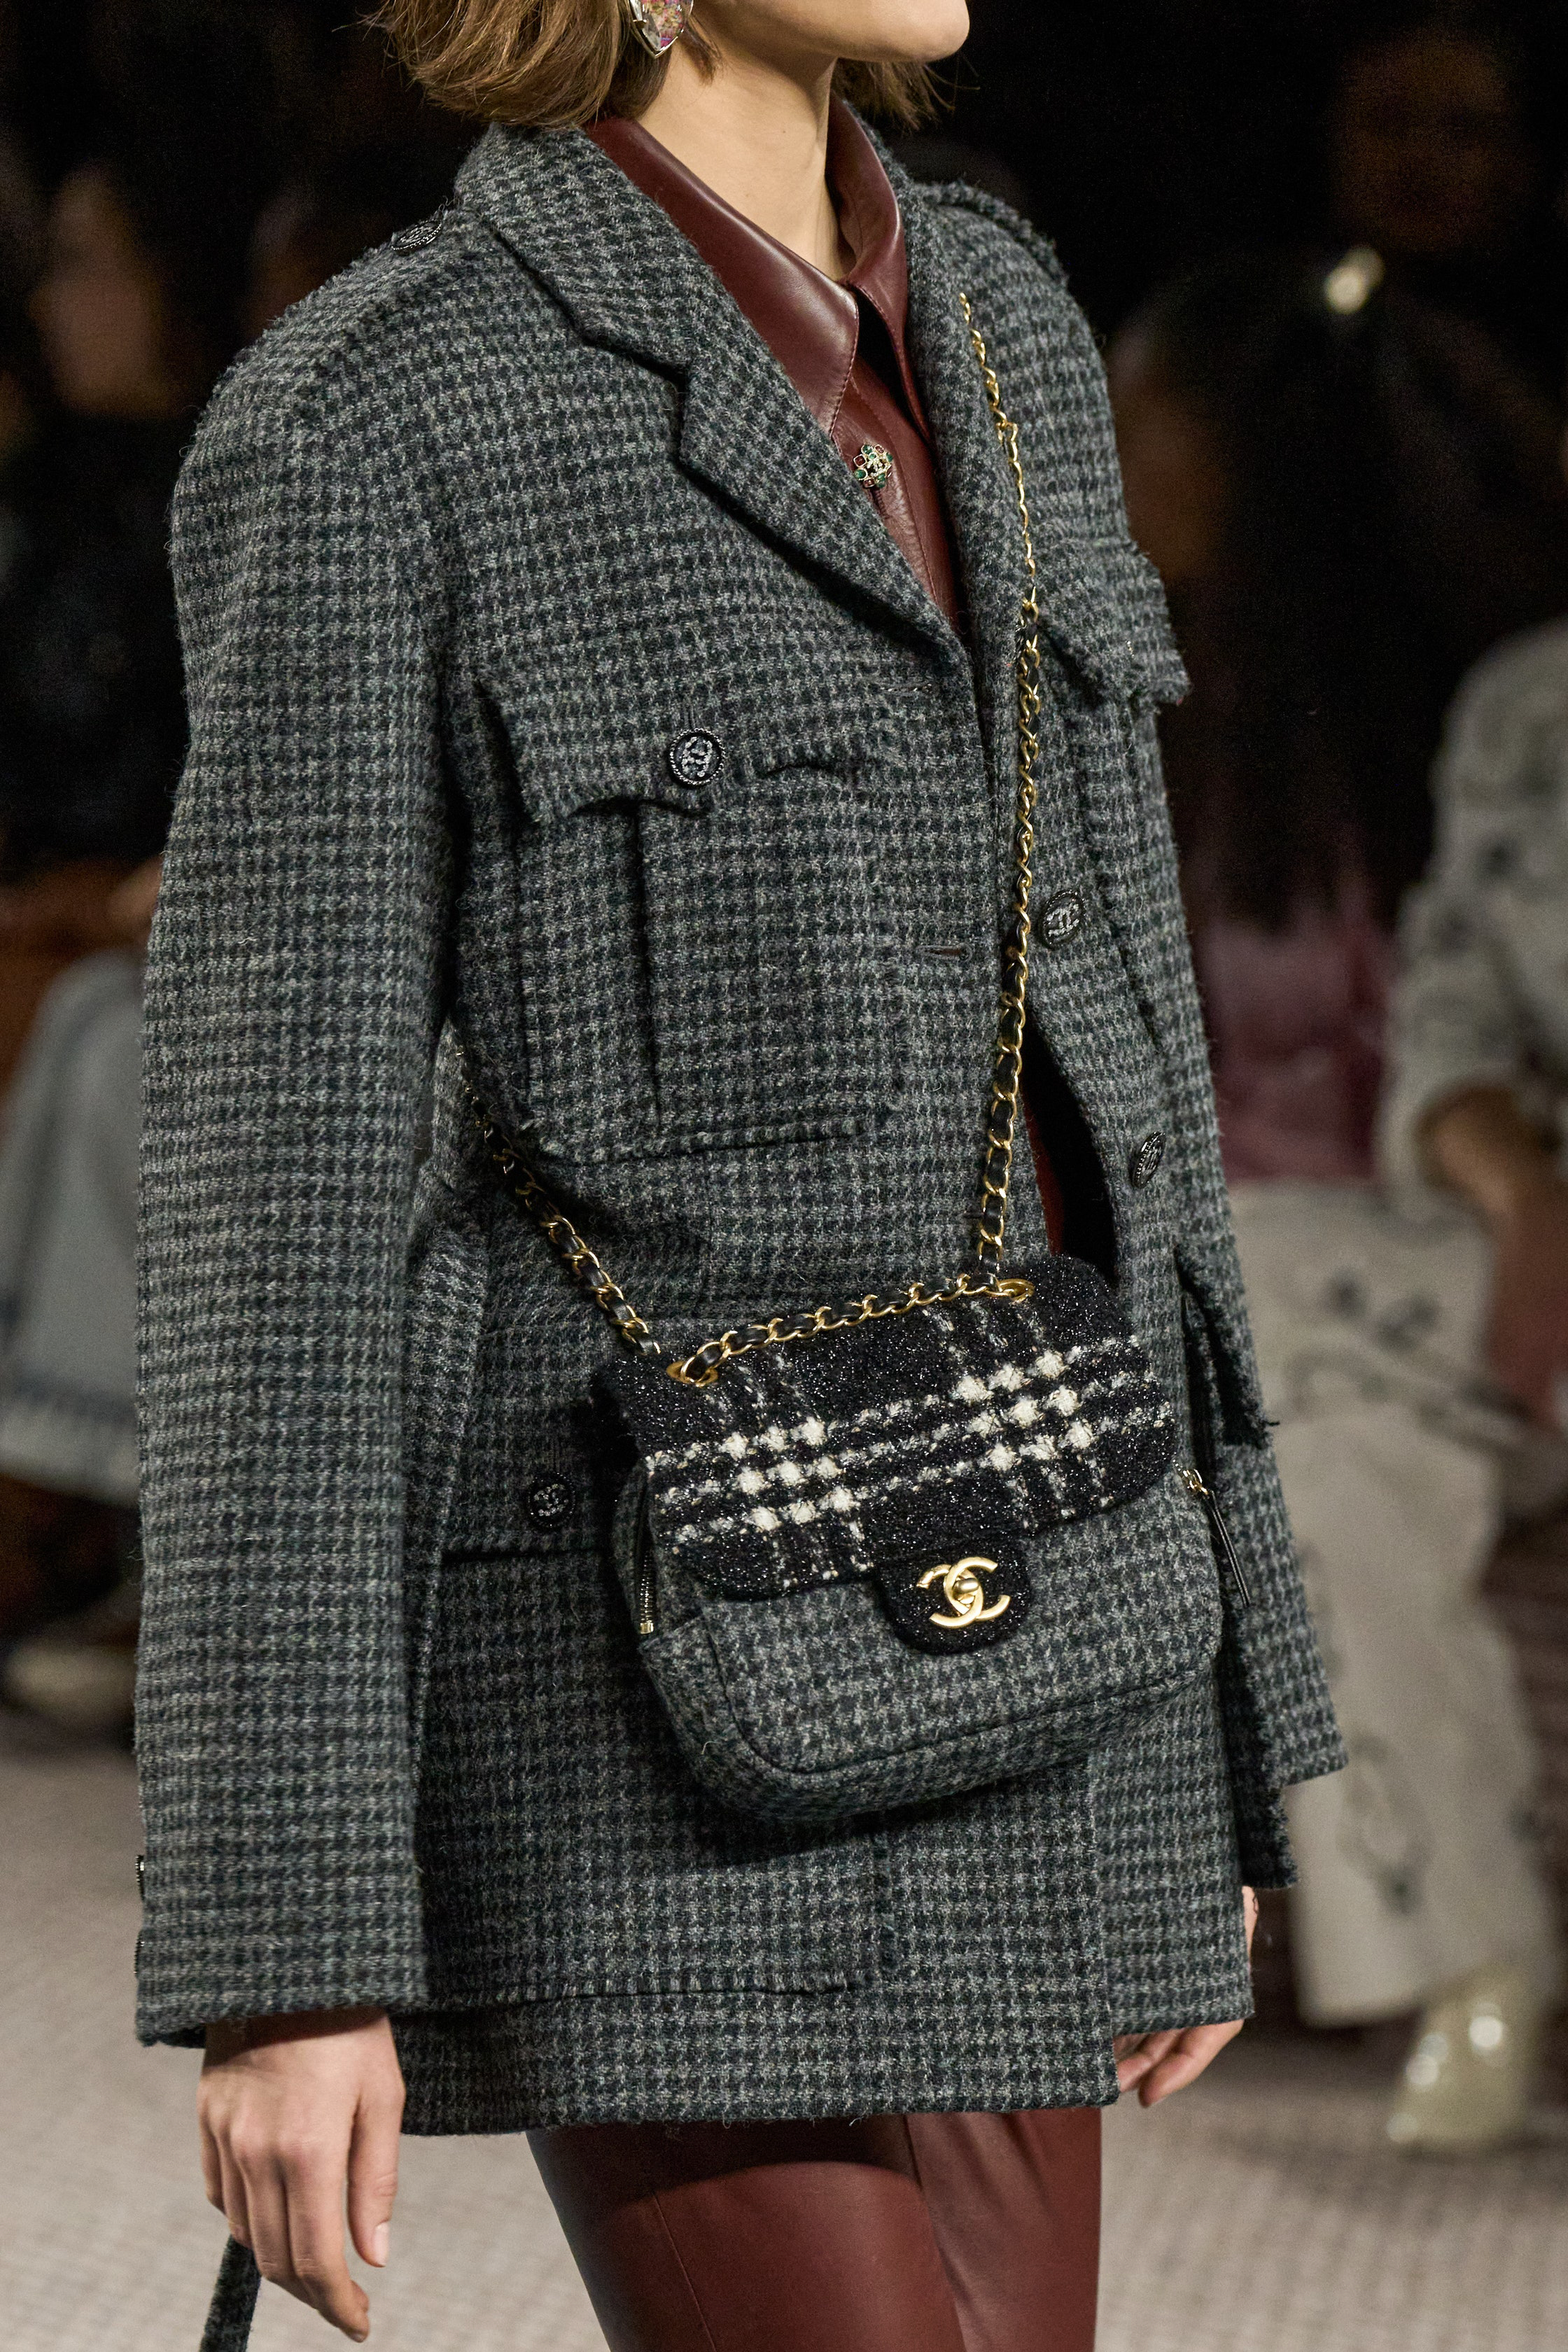 Bags, Bags, & More Bags on the Chanel Fall/Winter 2022 Runway